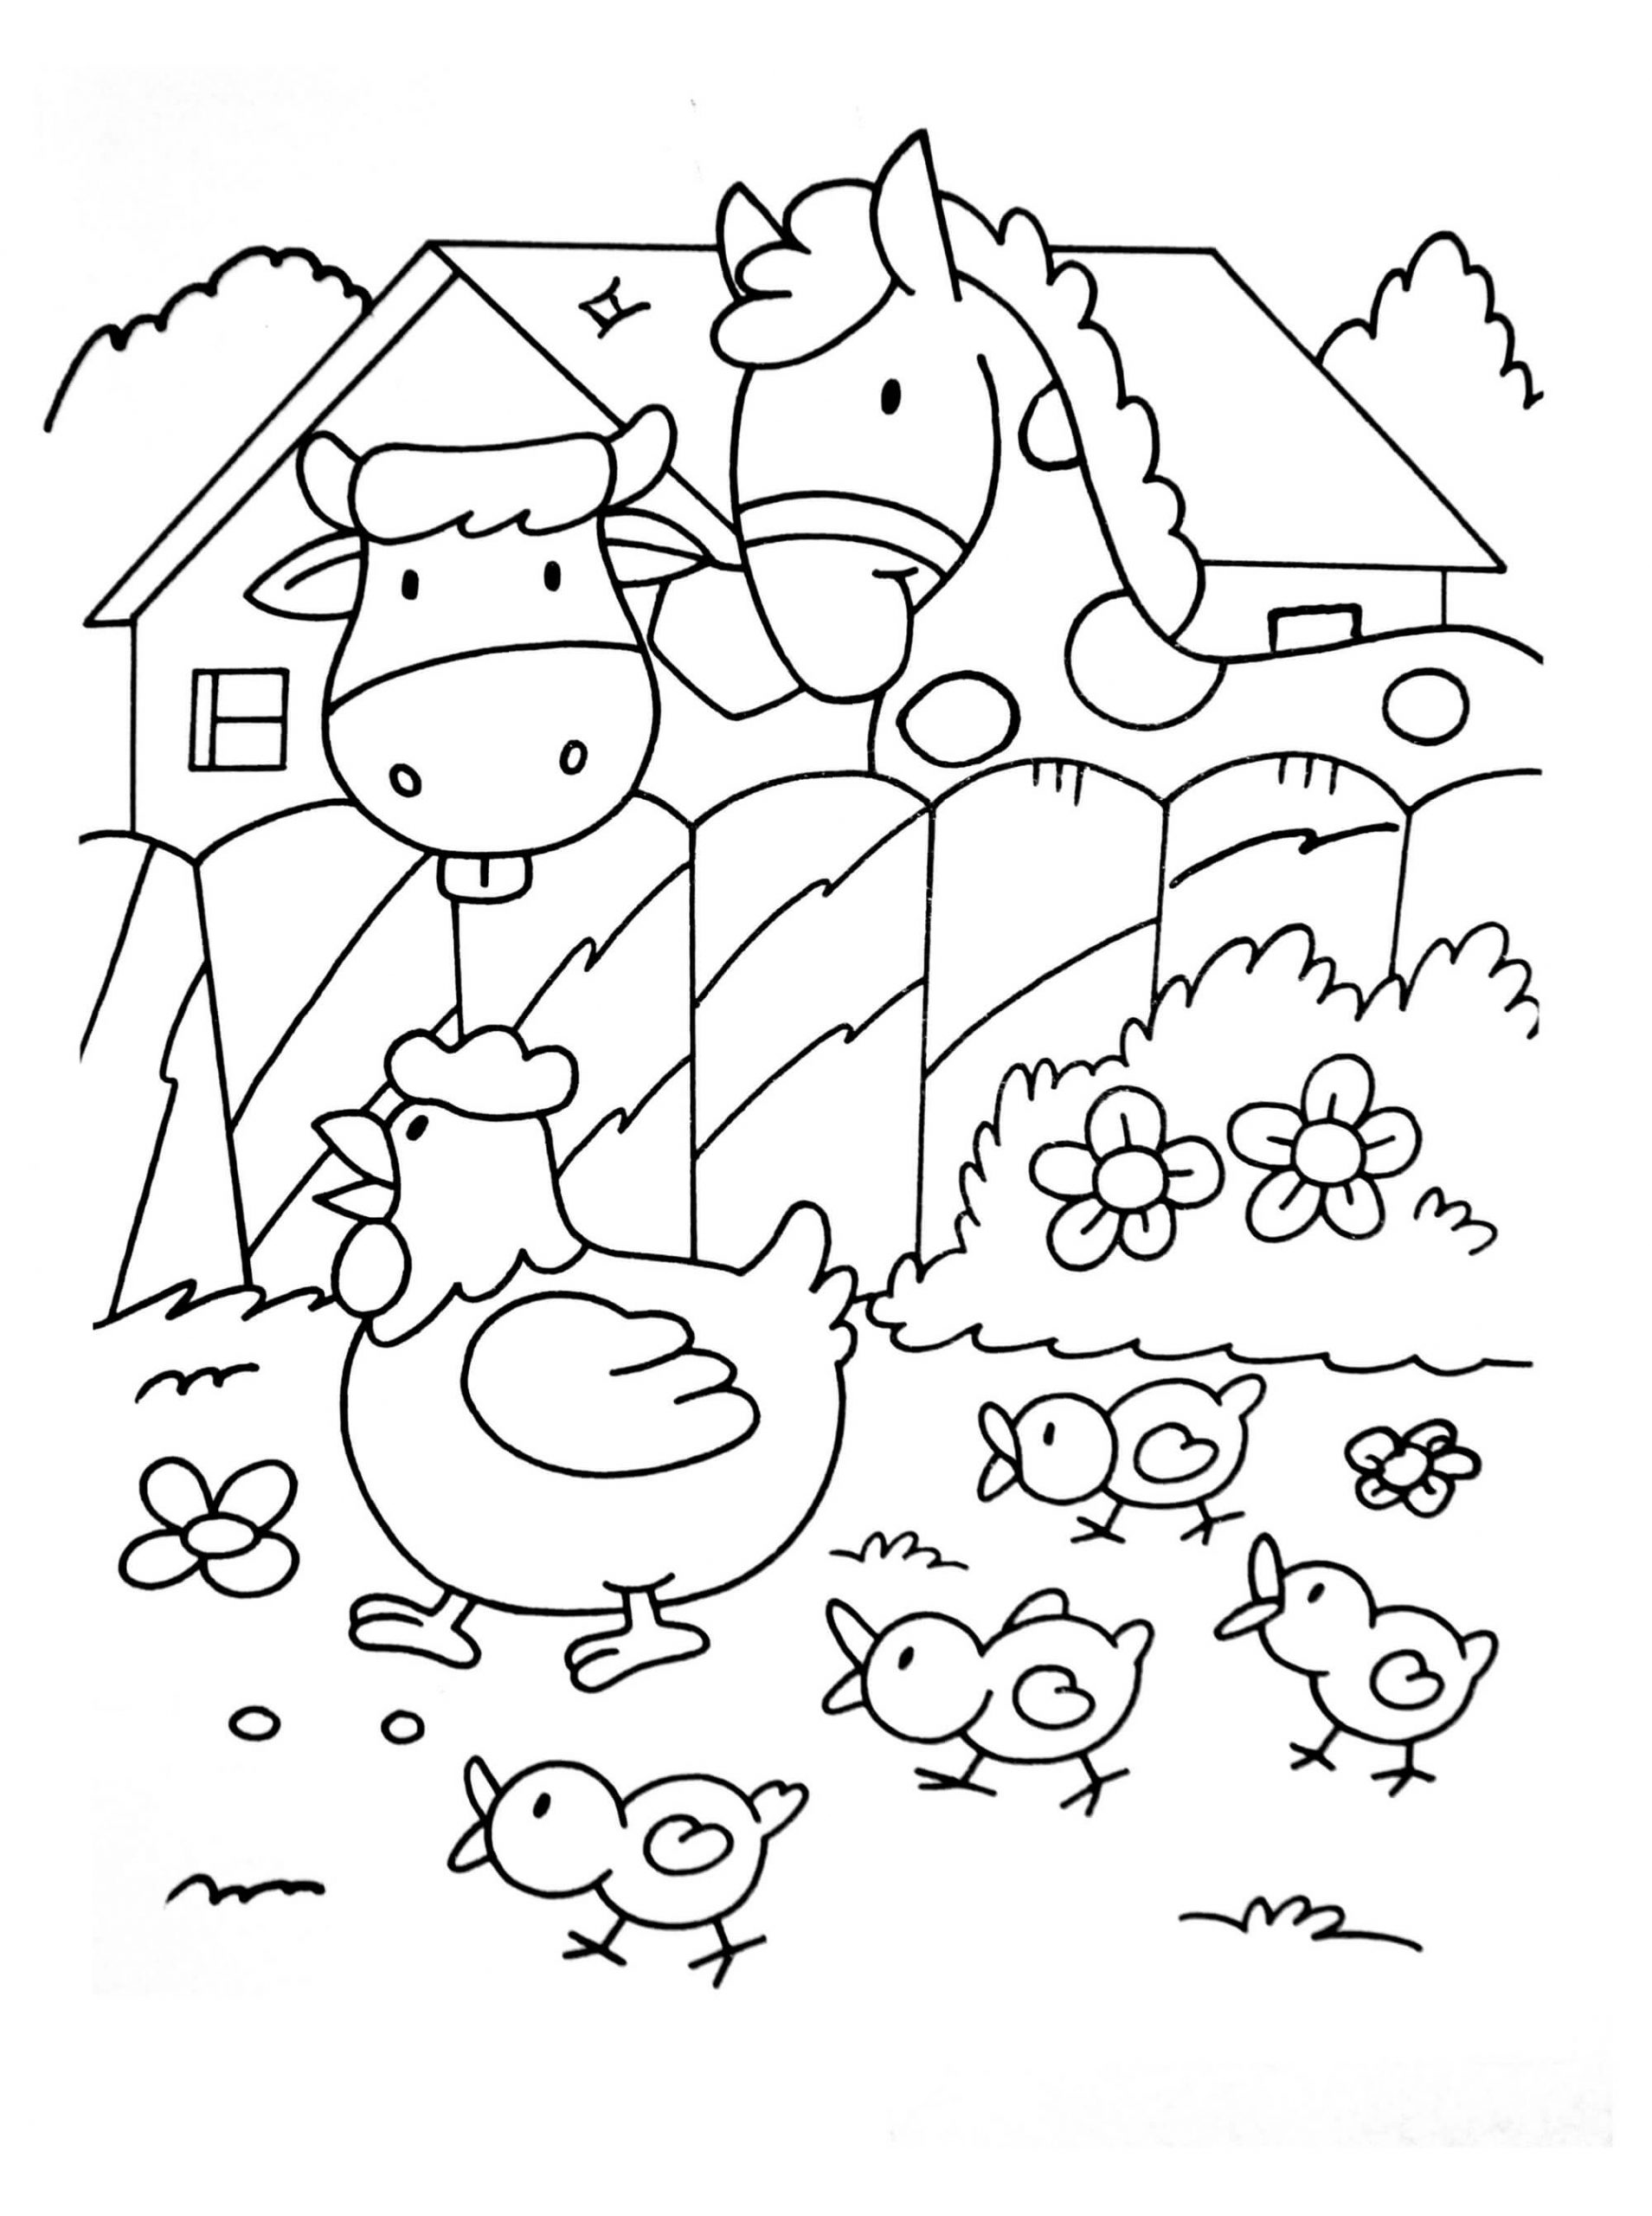 Animals in a Farm Coloring Page Free Printable Coloring Pages for Kids